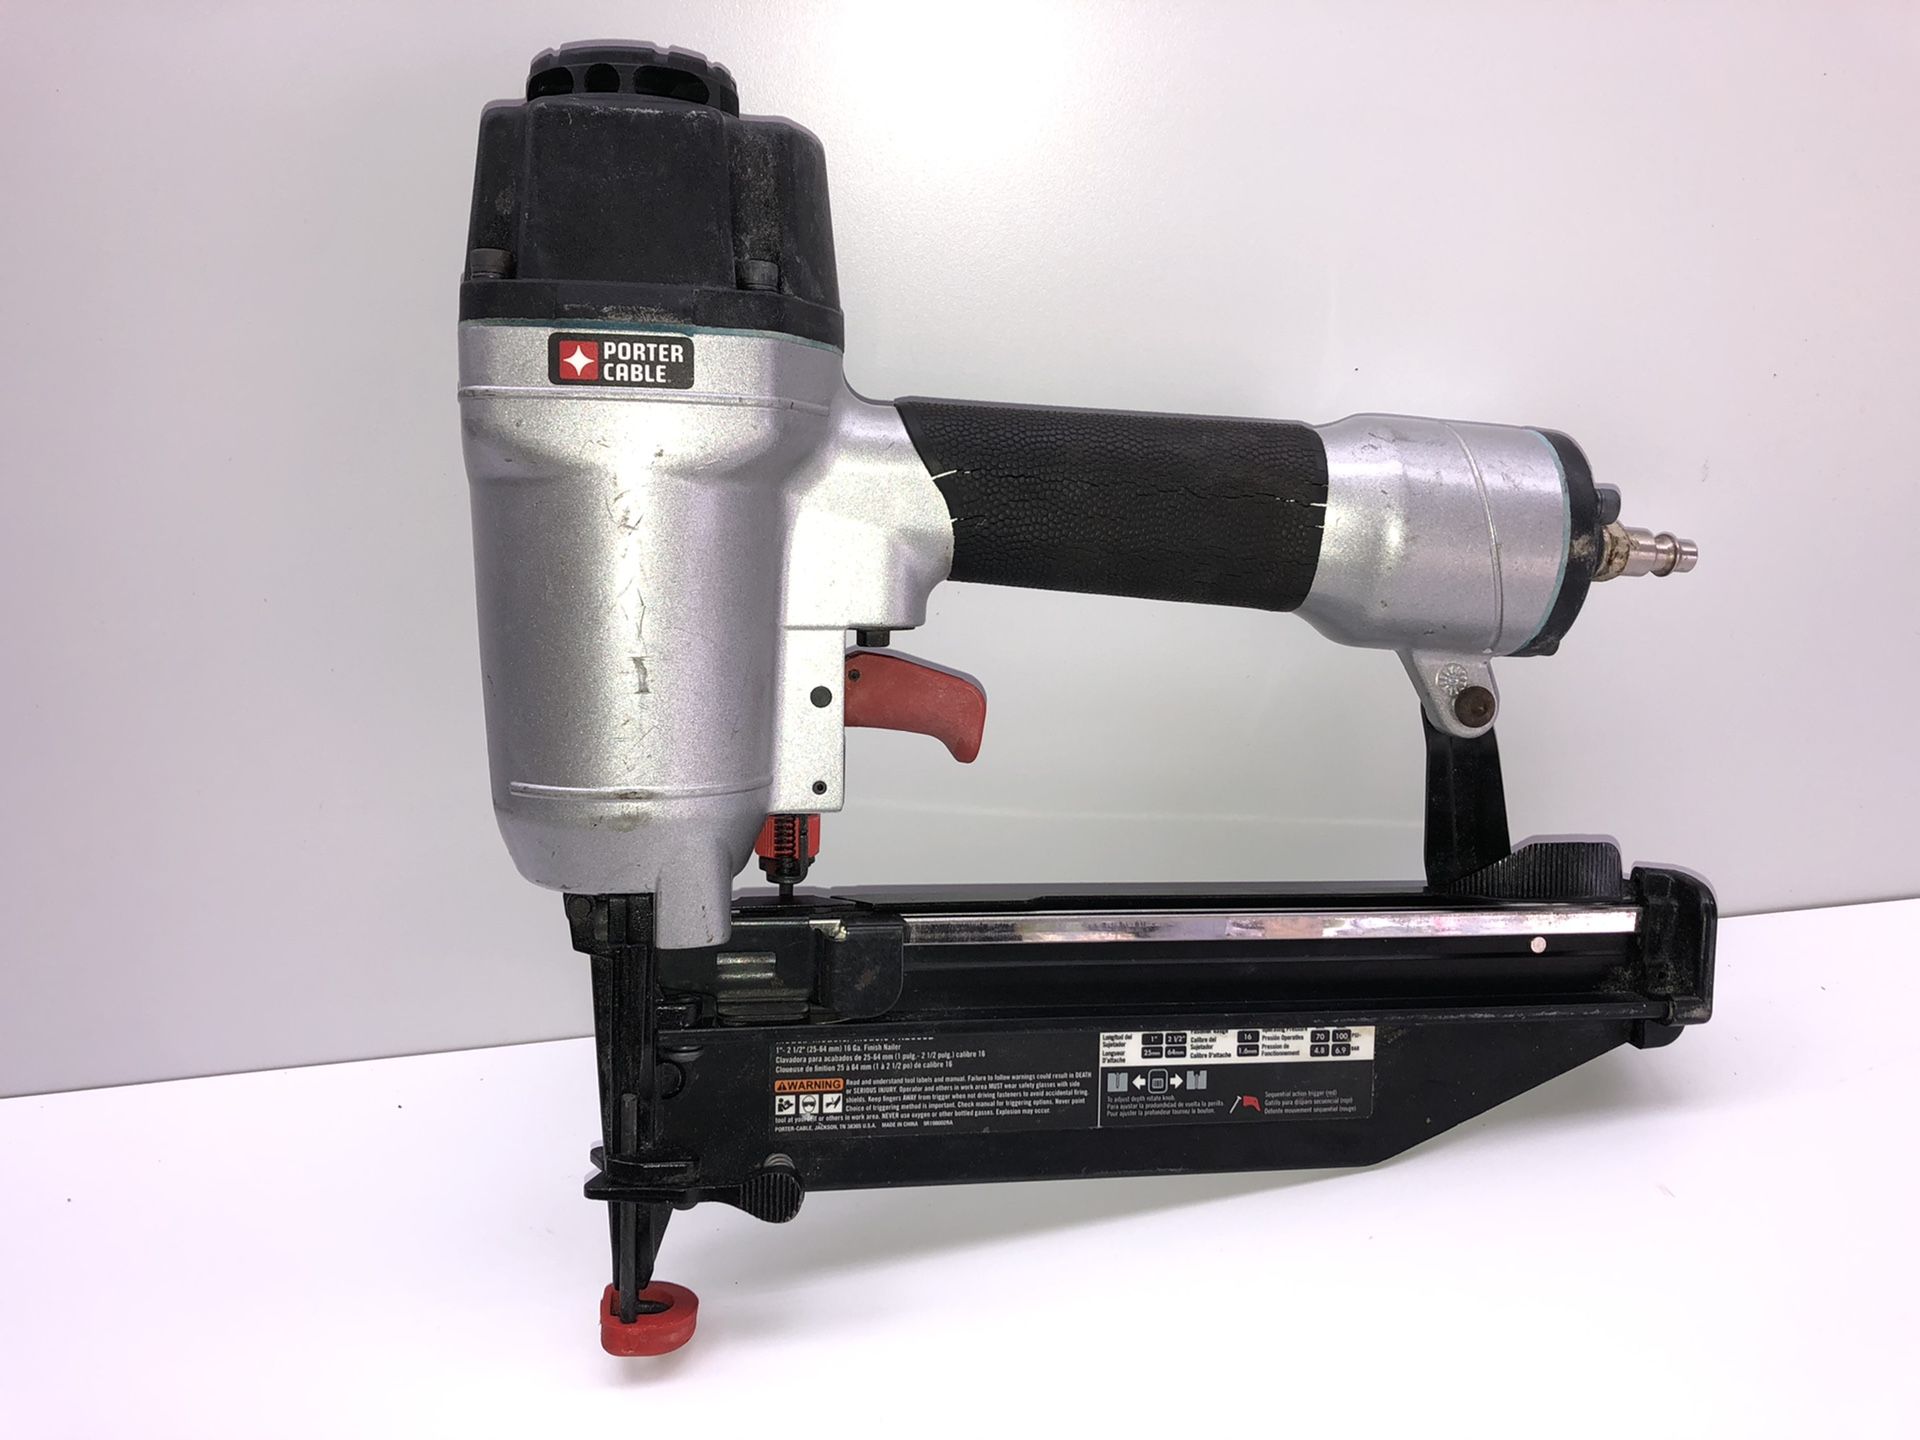 Porter Cable FN250SB 16 Gauge 1"- 2-1/2" Pneumatic Finish Nailer nail gun in excellent condition. Price is firm